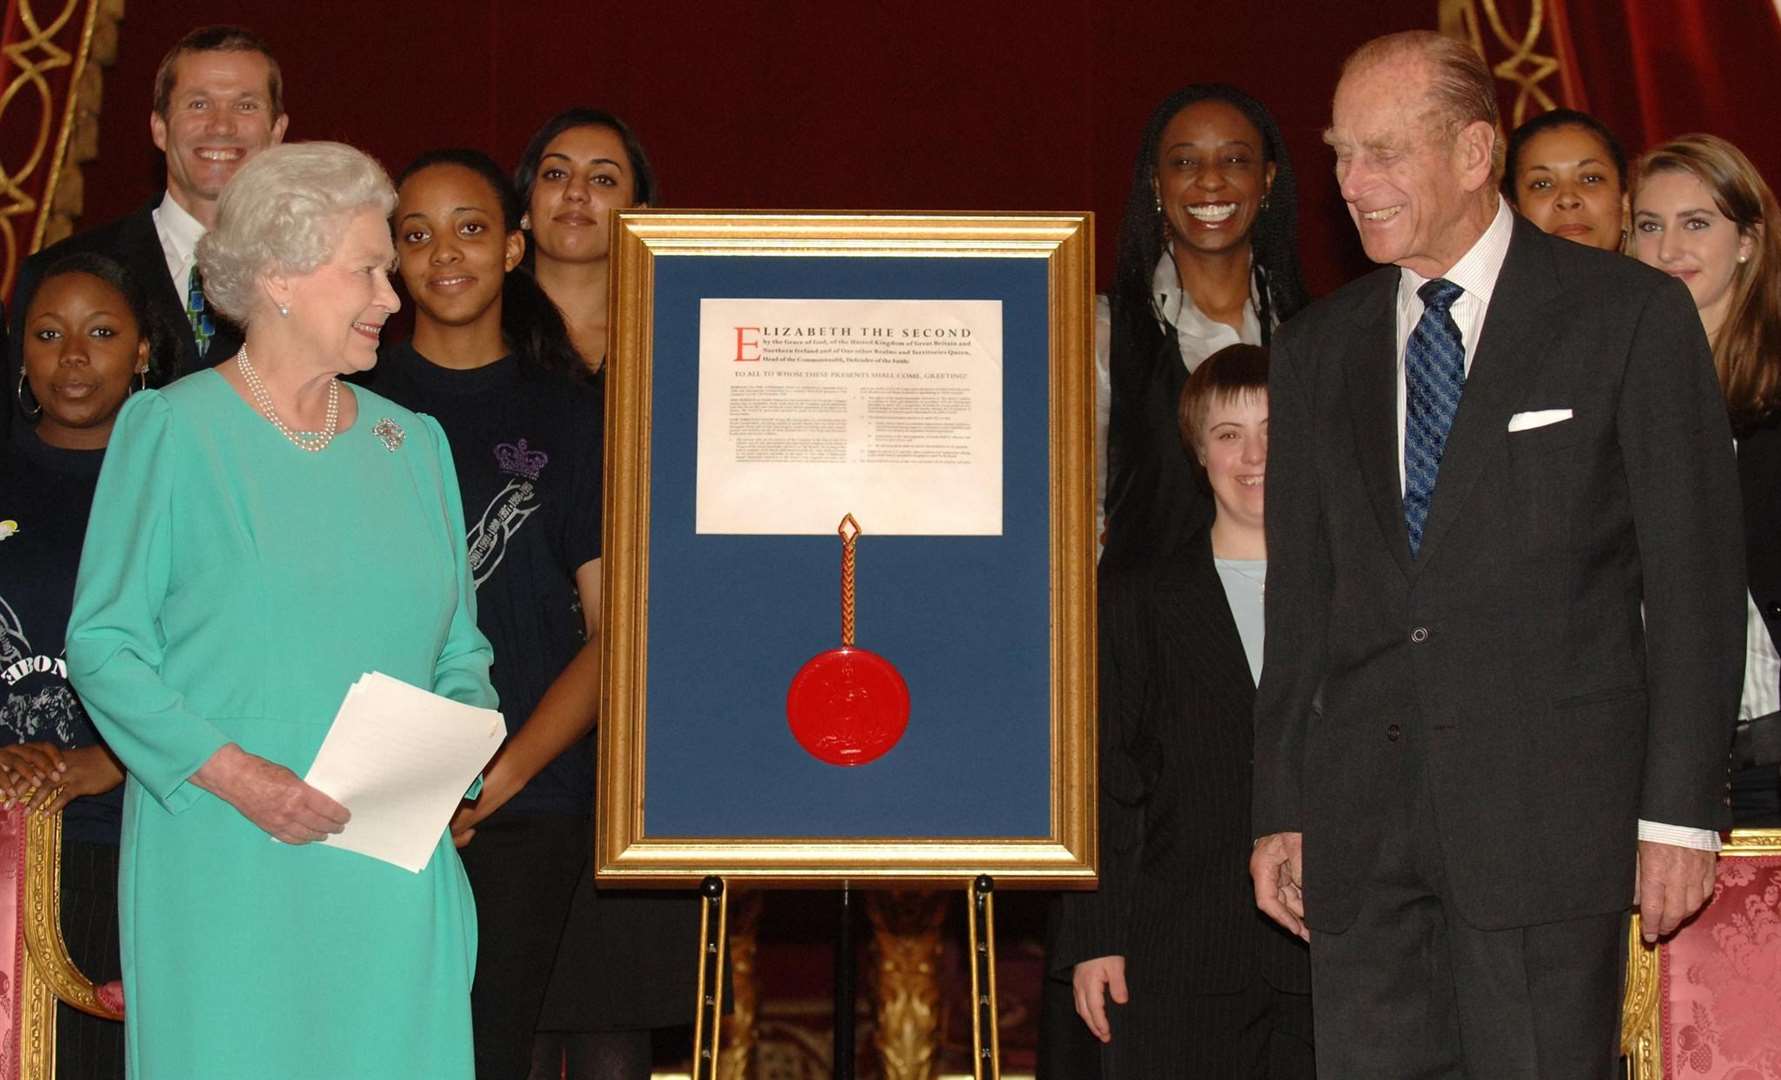 Duke of Edinburgh accepting a Royal Charter from the Queen on behalf of his awards scheme (Fiona Hanson/PA)